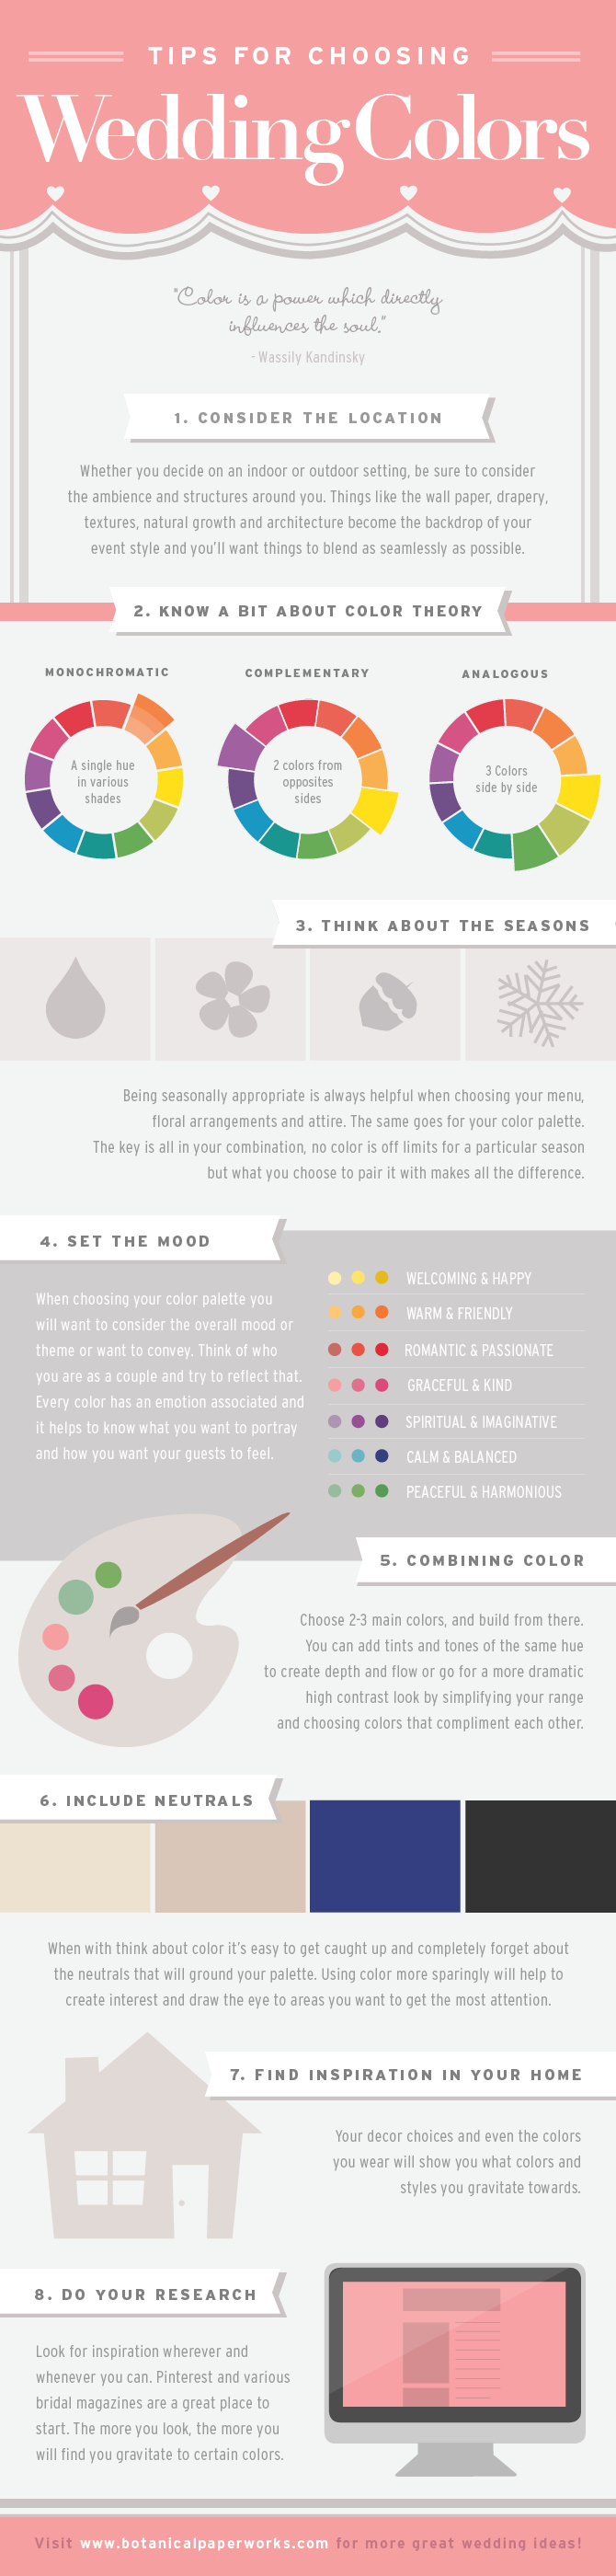 Tips For Choosing Wedding Colors: An easy to follow guide to planning the perfect palette. 